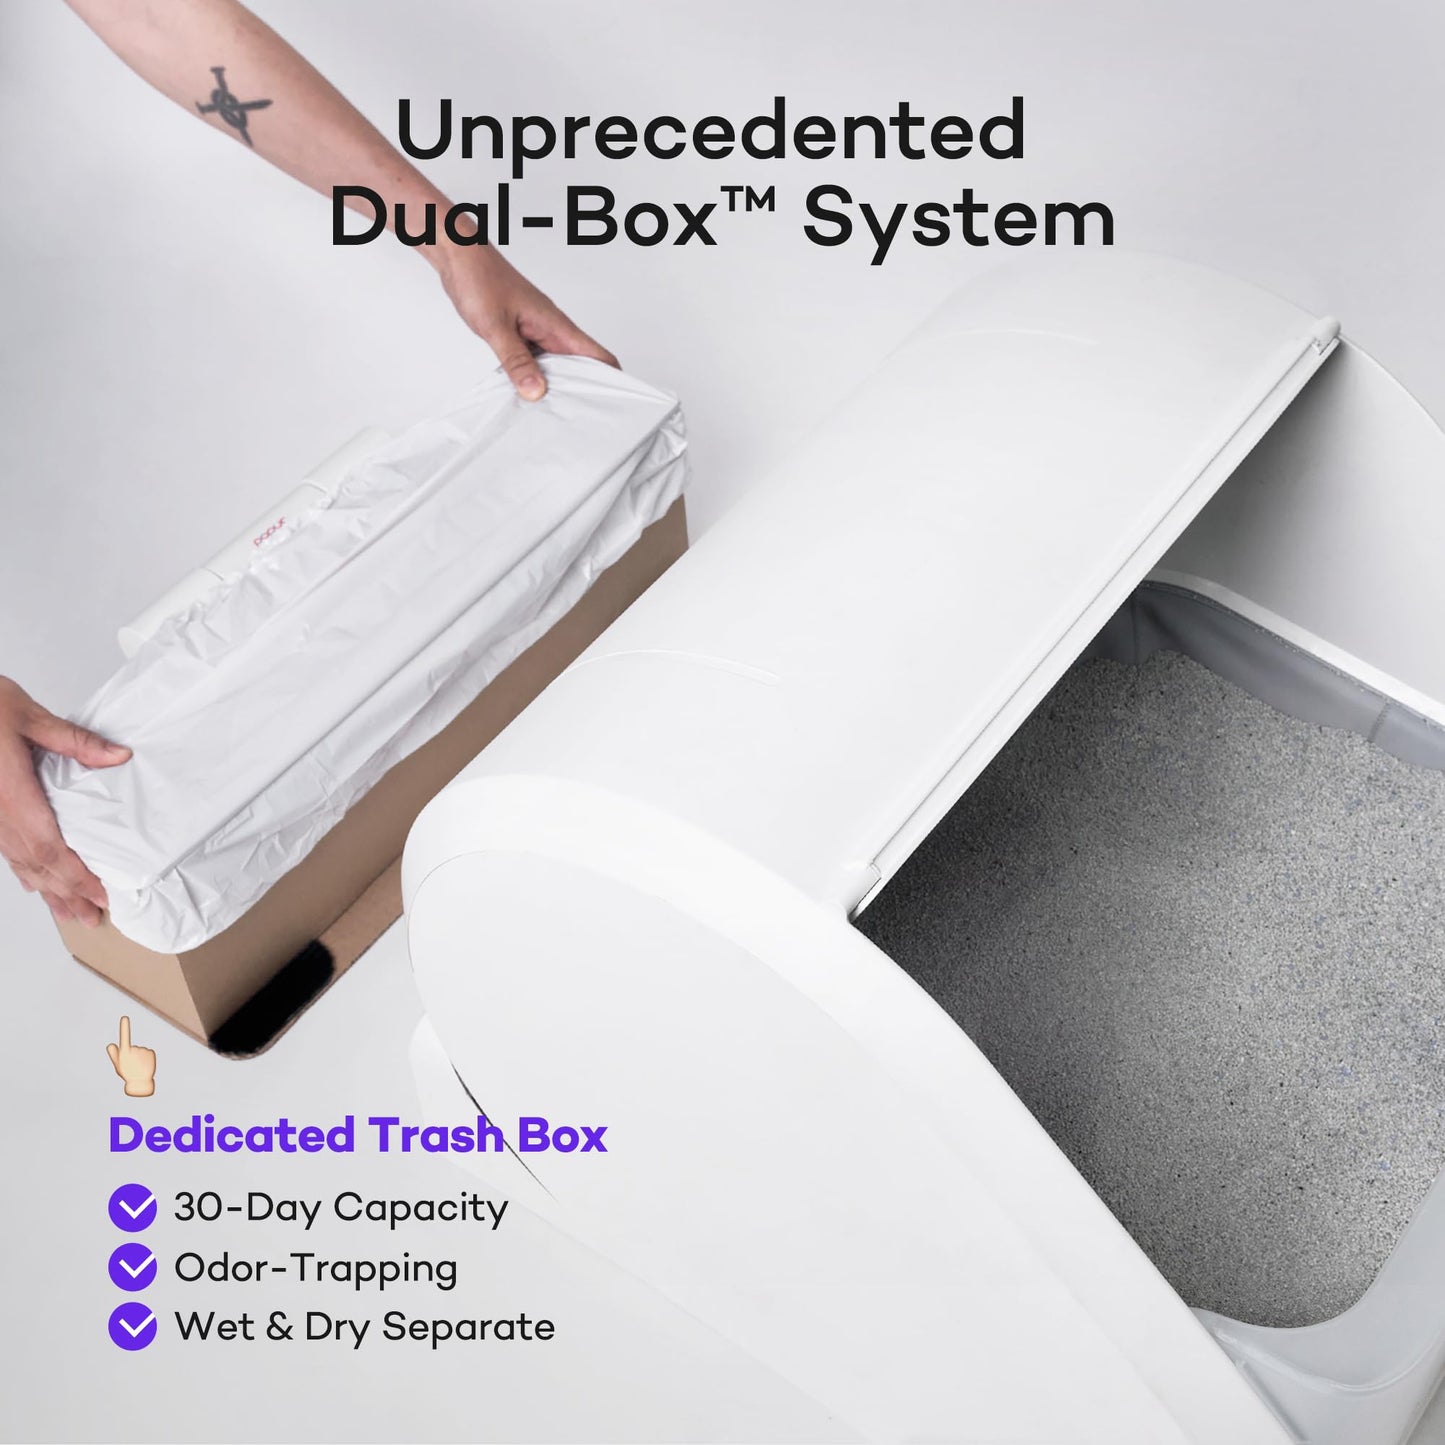 Popur X5 Self-Cleaning Cat Litter Box - Unique Split System, Open Top, 30-Day Capacity